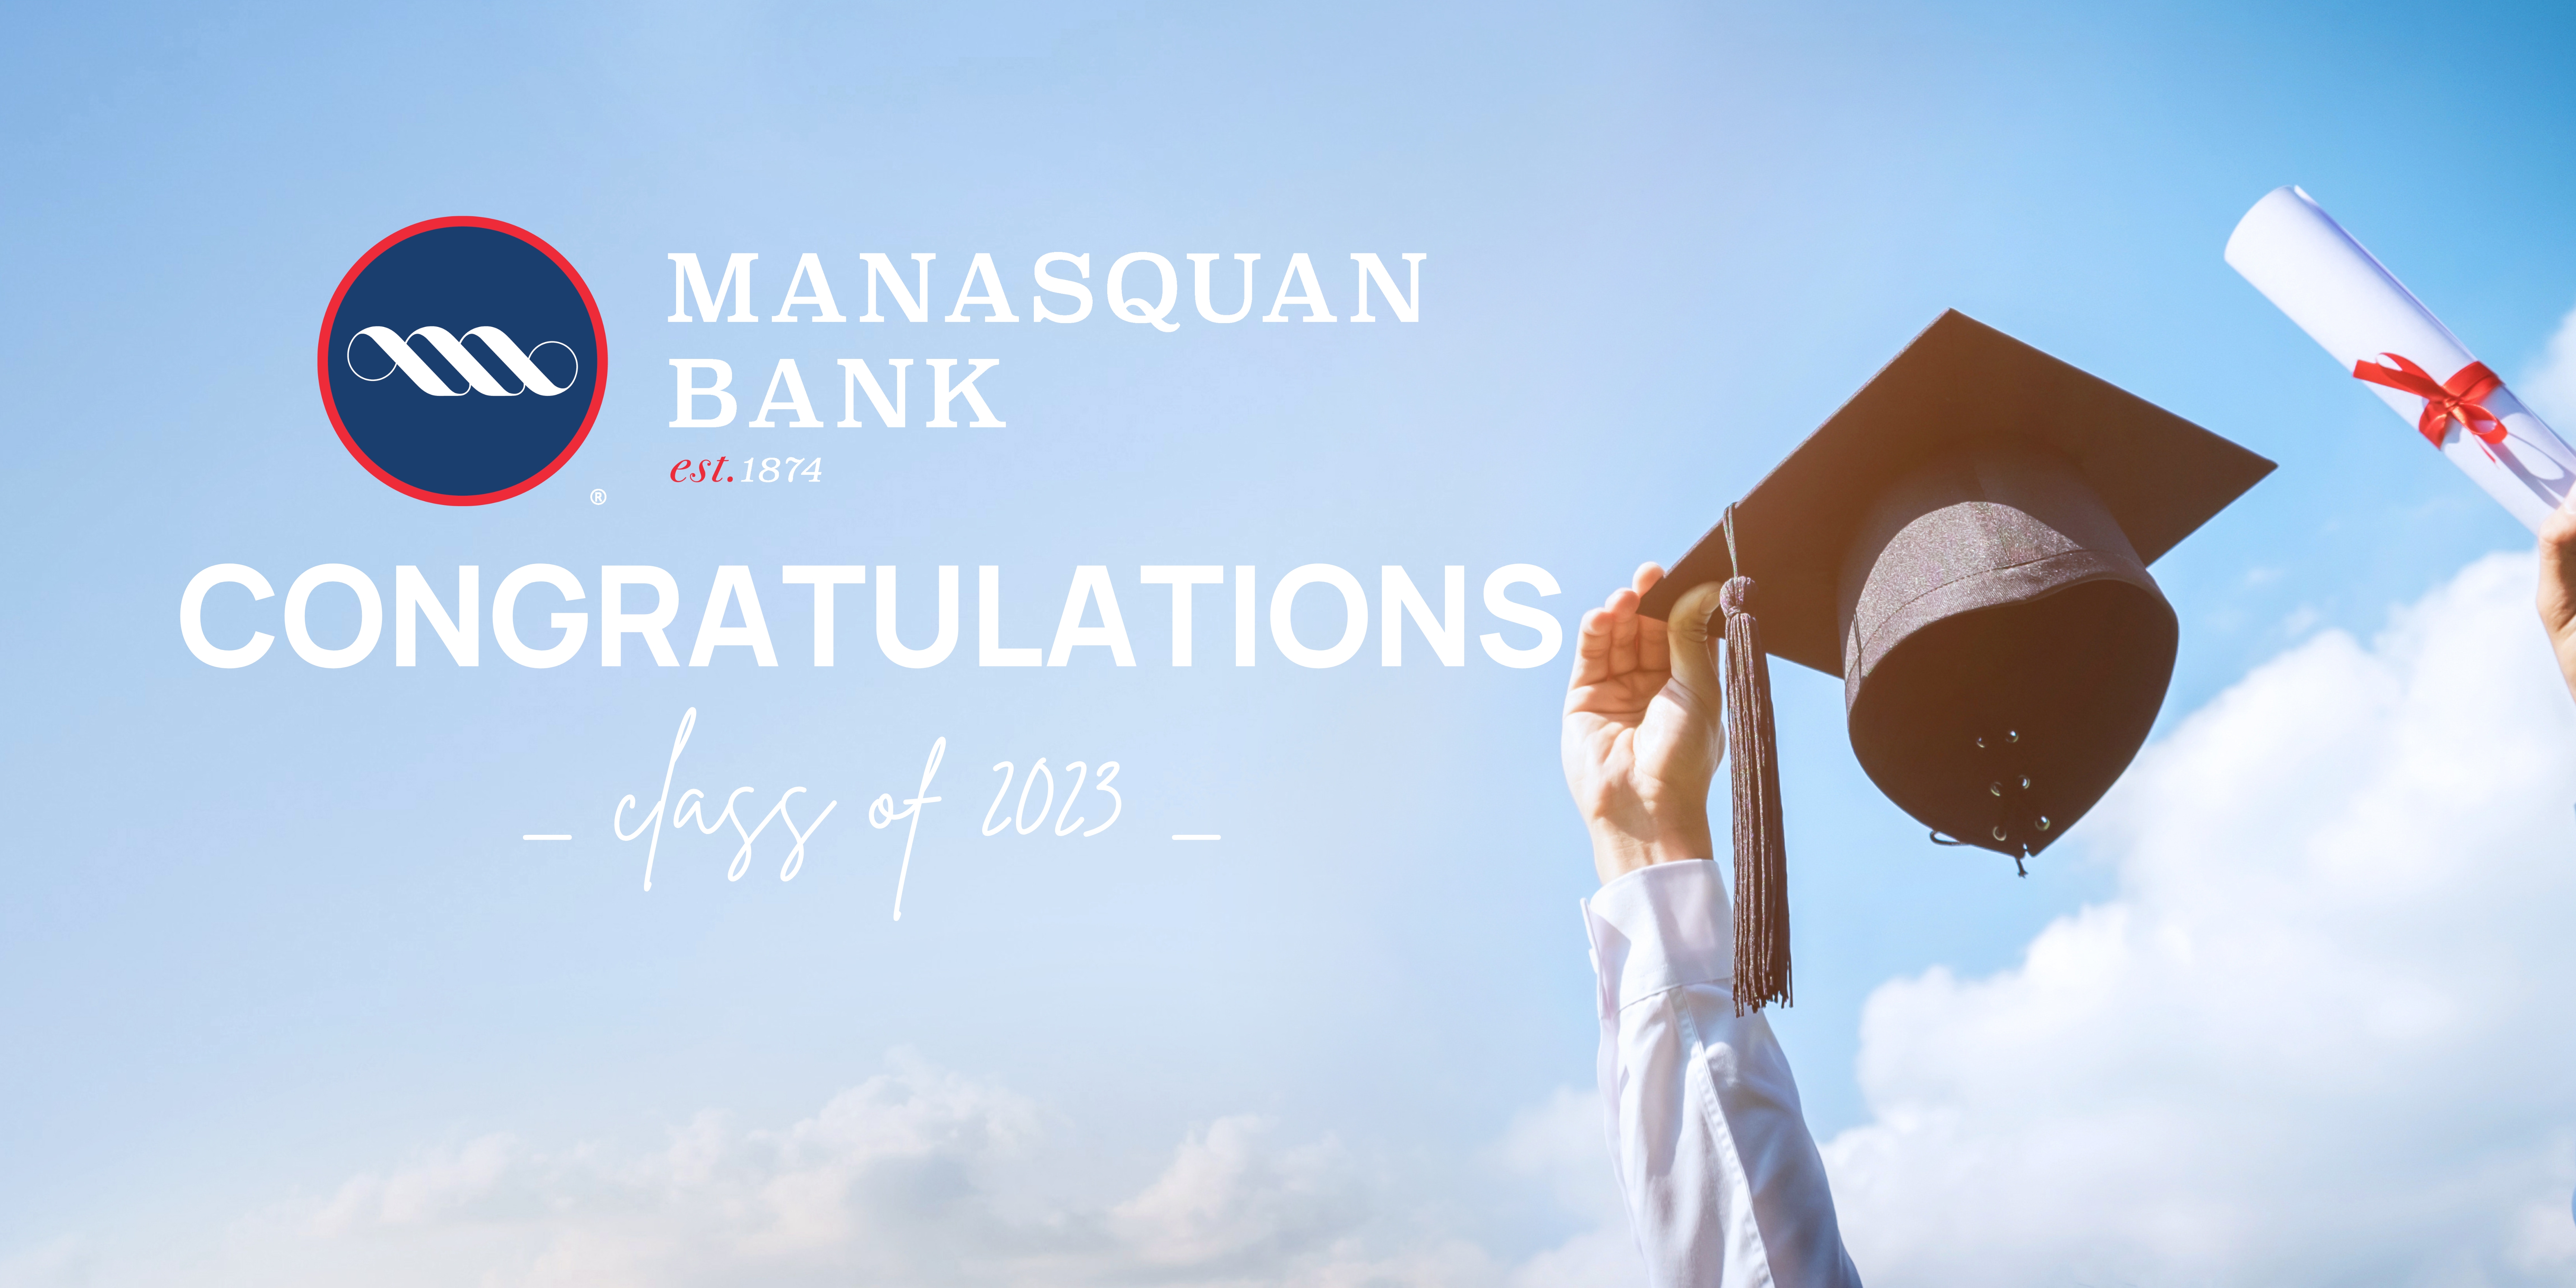 MANASQUAN BANK CONGRATULATES THE GRADUATING CLASS OF 2023 ON THEIR CONTINUED EDUCATION 